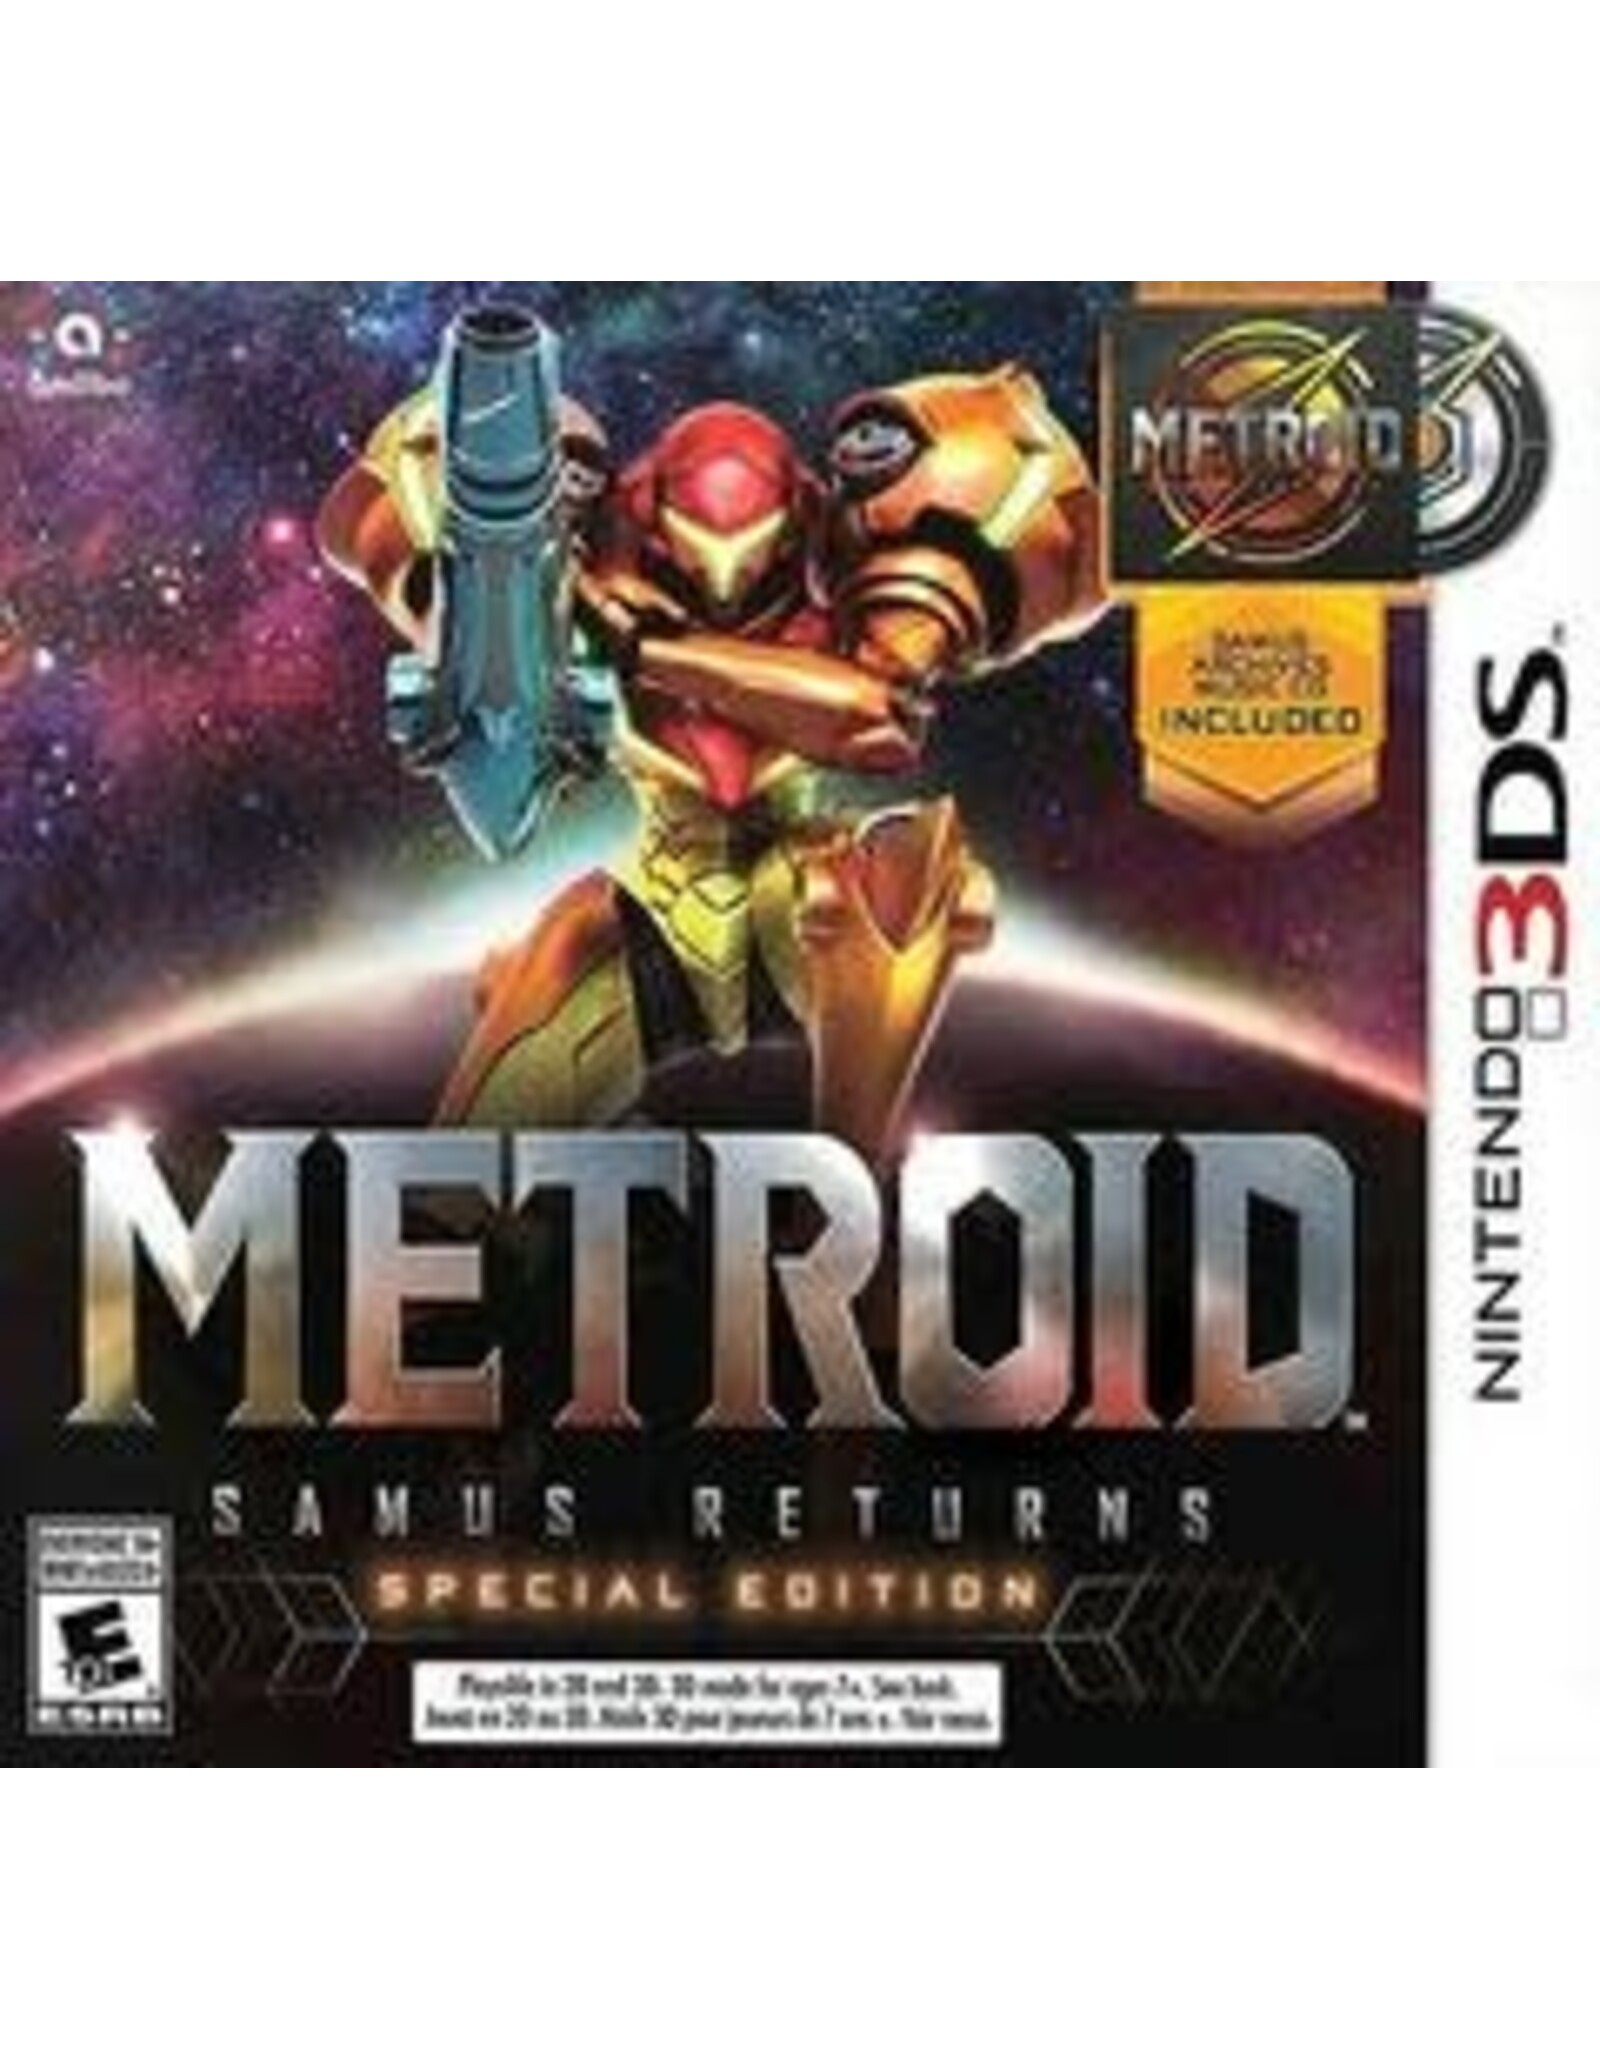 Nintendo 3DS Metroid Samus Returns Special Edition - Game/Inner Case Only (Used)